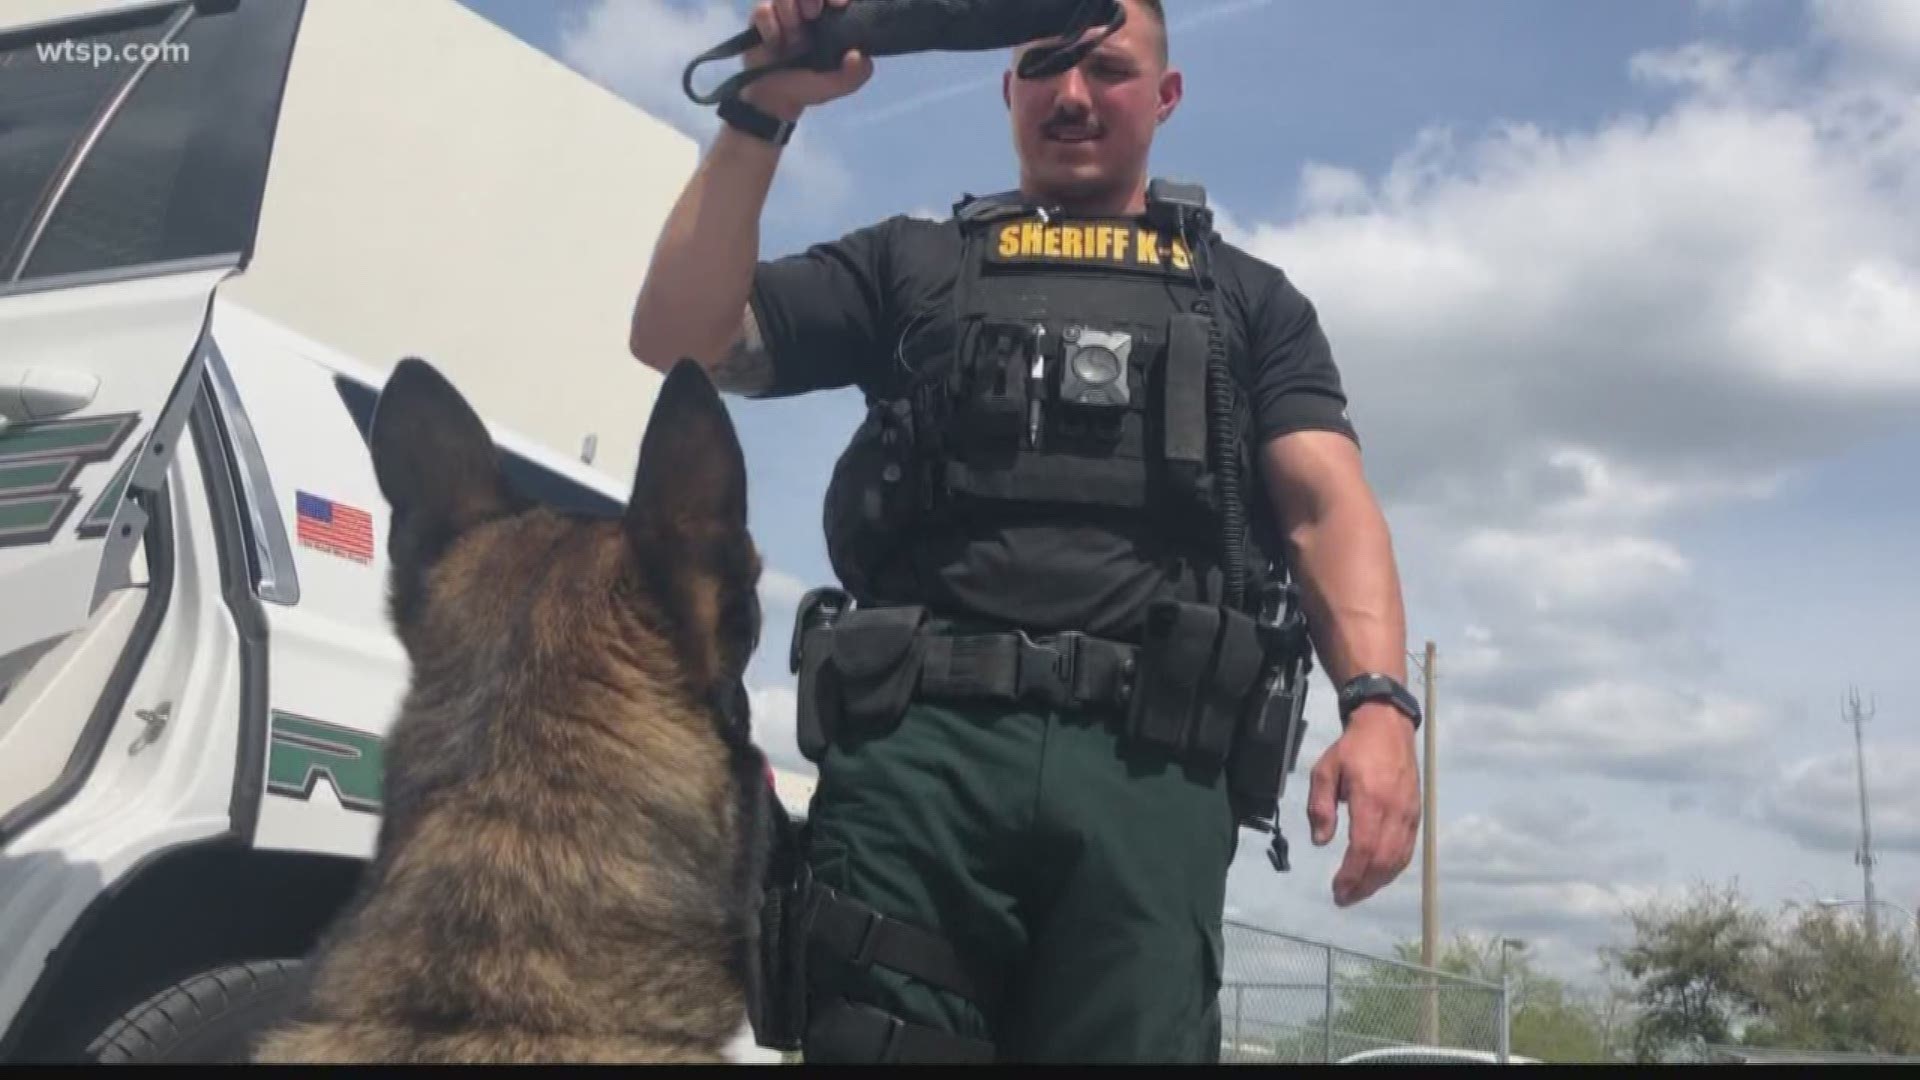 Pasco County Deputy Nick Carmack and his K-9 Shep became overnight TV stars on the hit A&E show "Live PD." But now, after two years, the department has left the show.